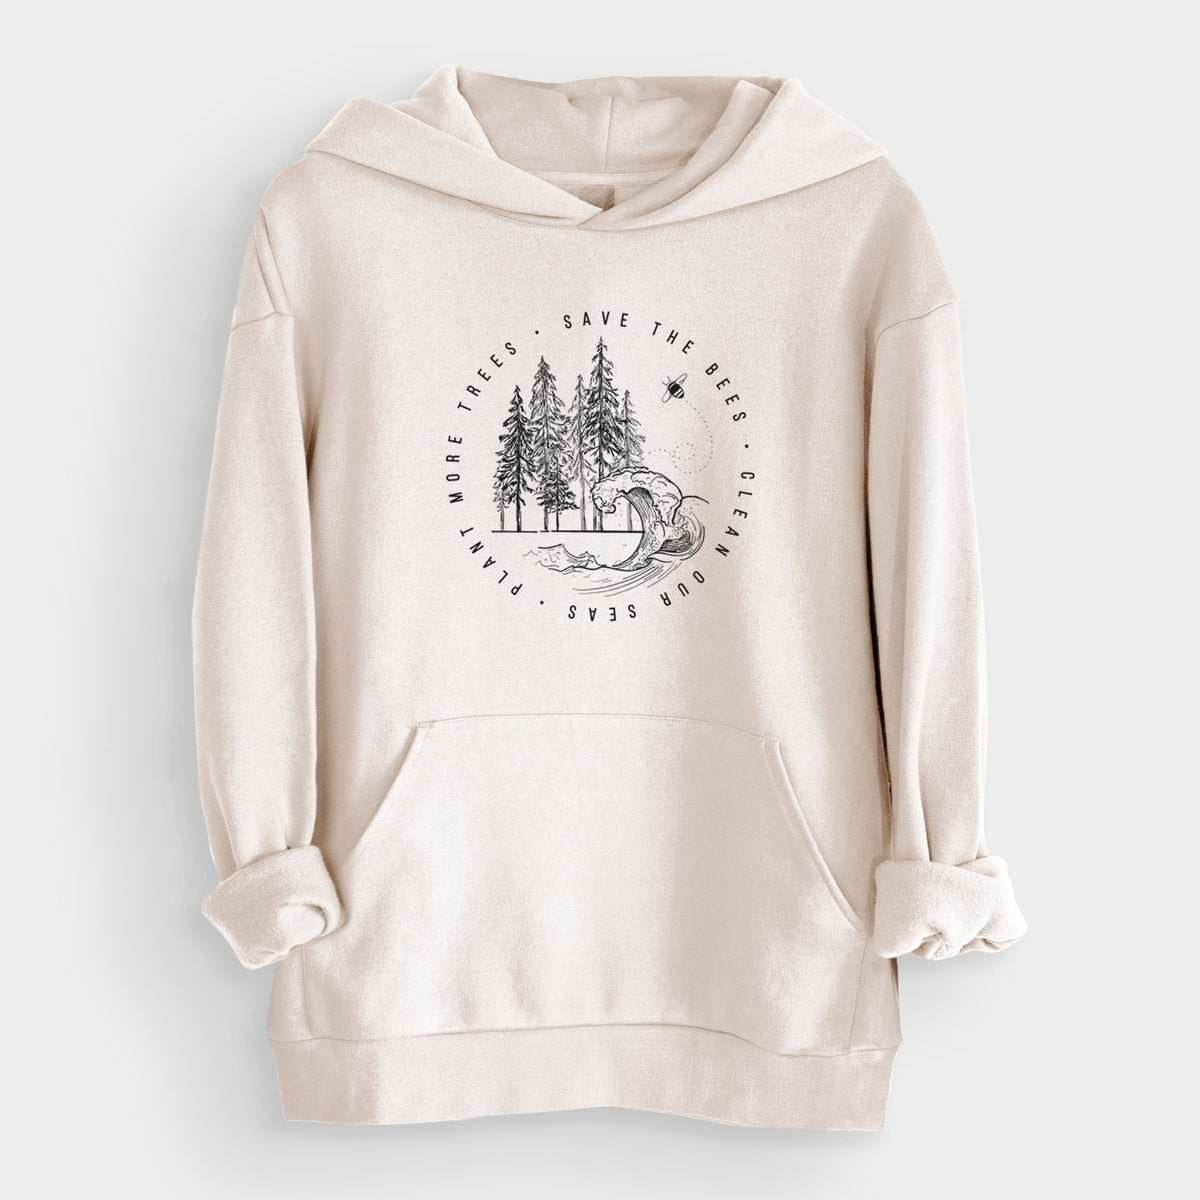 Save the Bees, Clean our Seas, Plant more Trees  - Bodega Midweight Hoodie